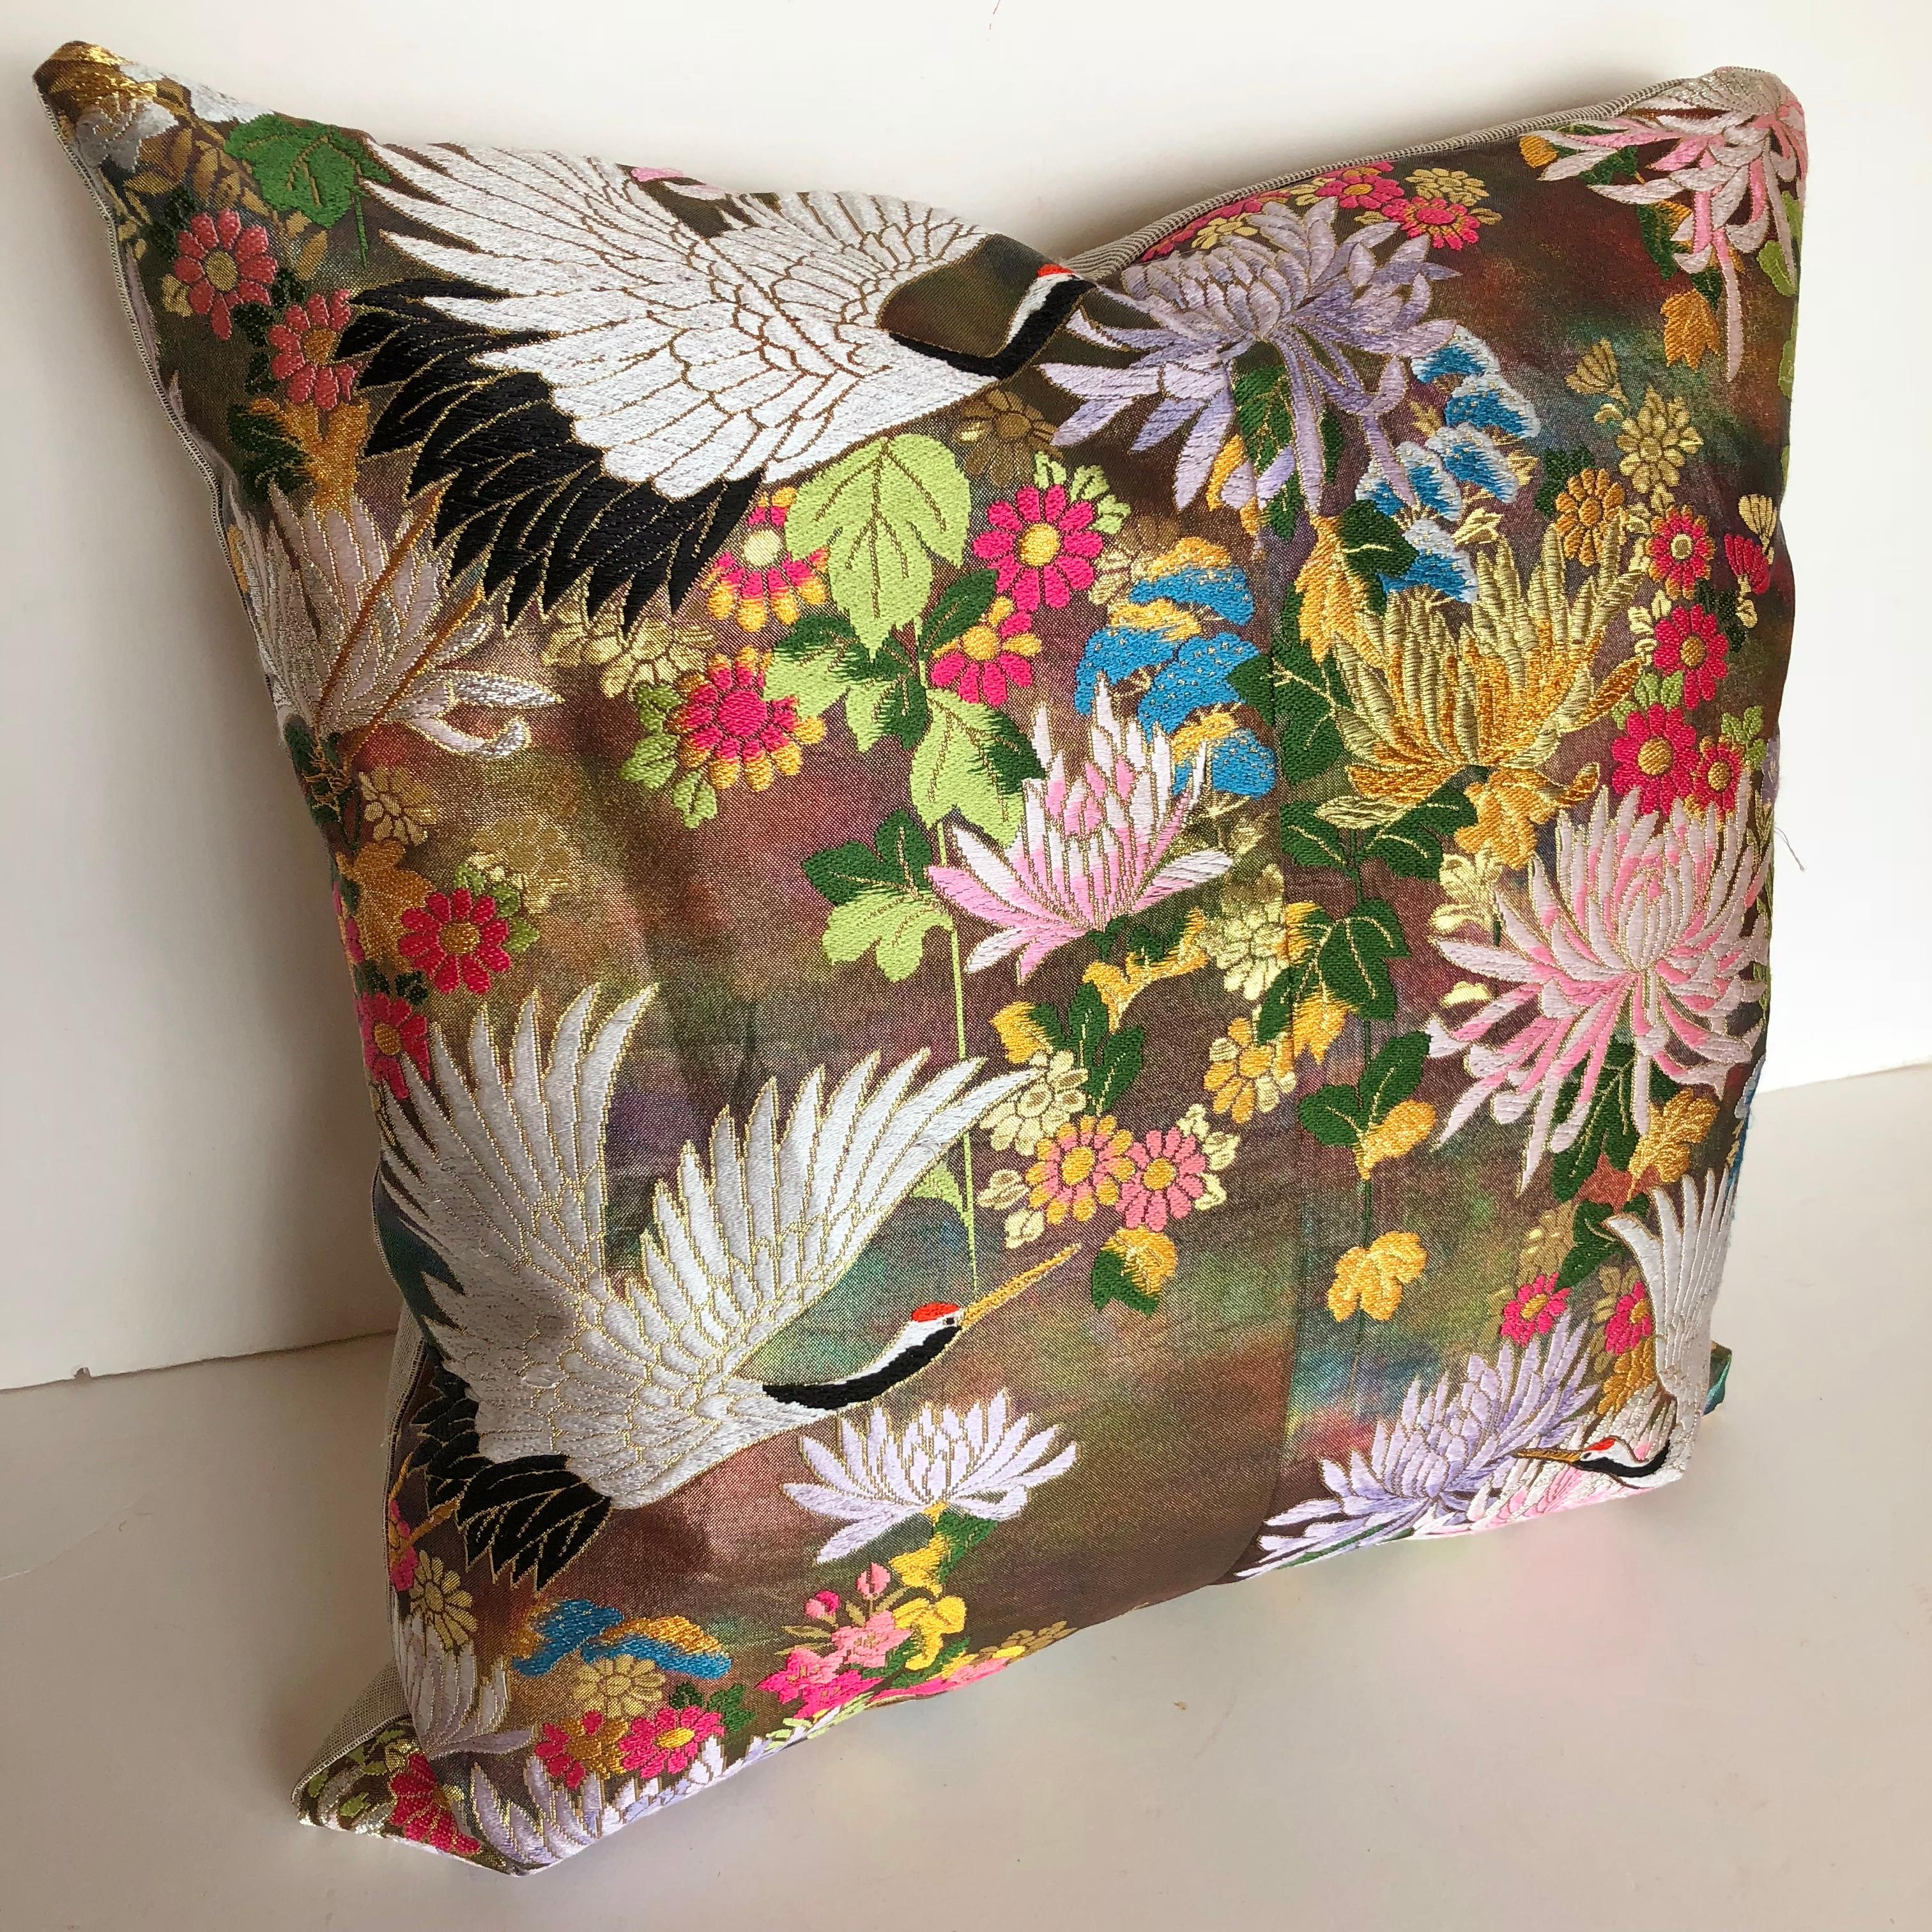 Custom pillow cut from a vintage Japanese silk Uchikake, the traditional wedding kimono. The silk textile has a floral design in vibrant colors with embroidered birds. The pillow is backed in a soft silk stripe, filled with an insert of 50/50 down